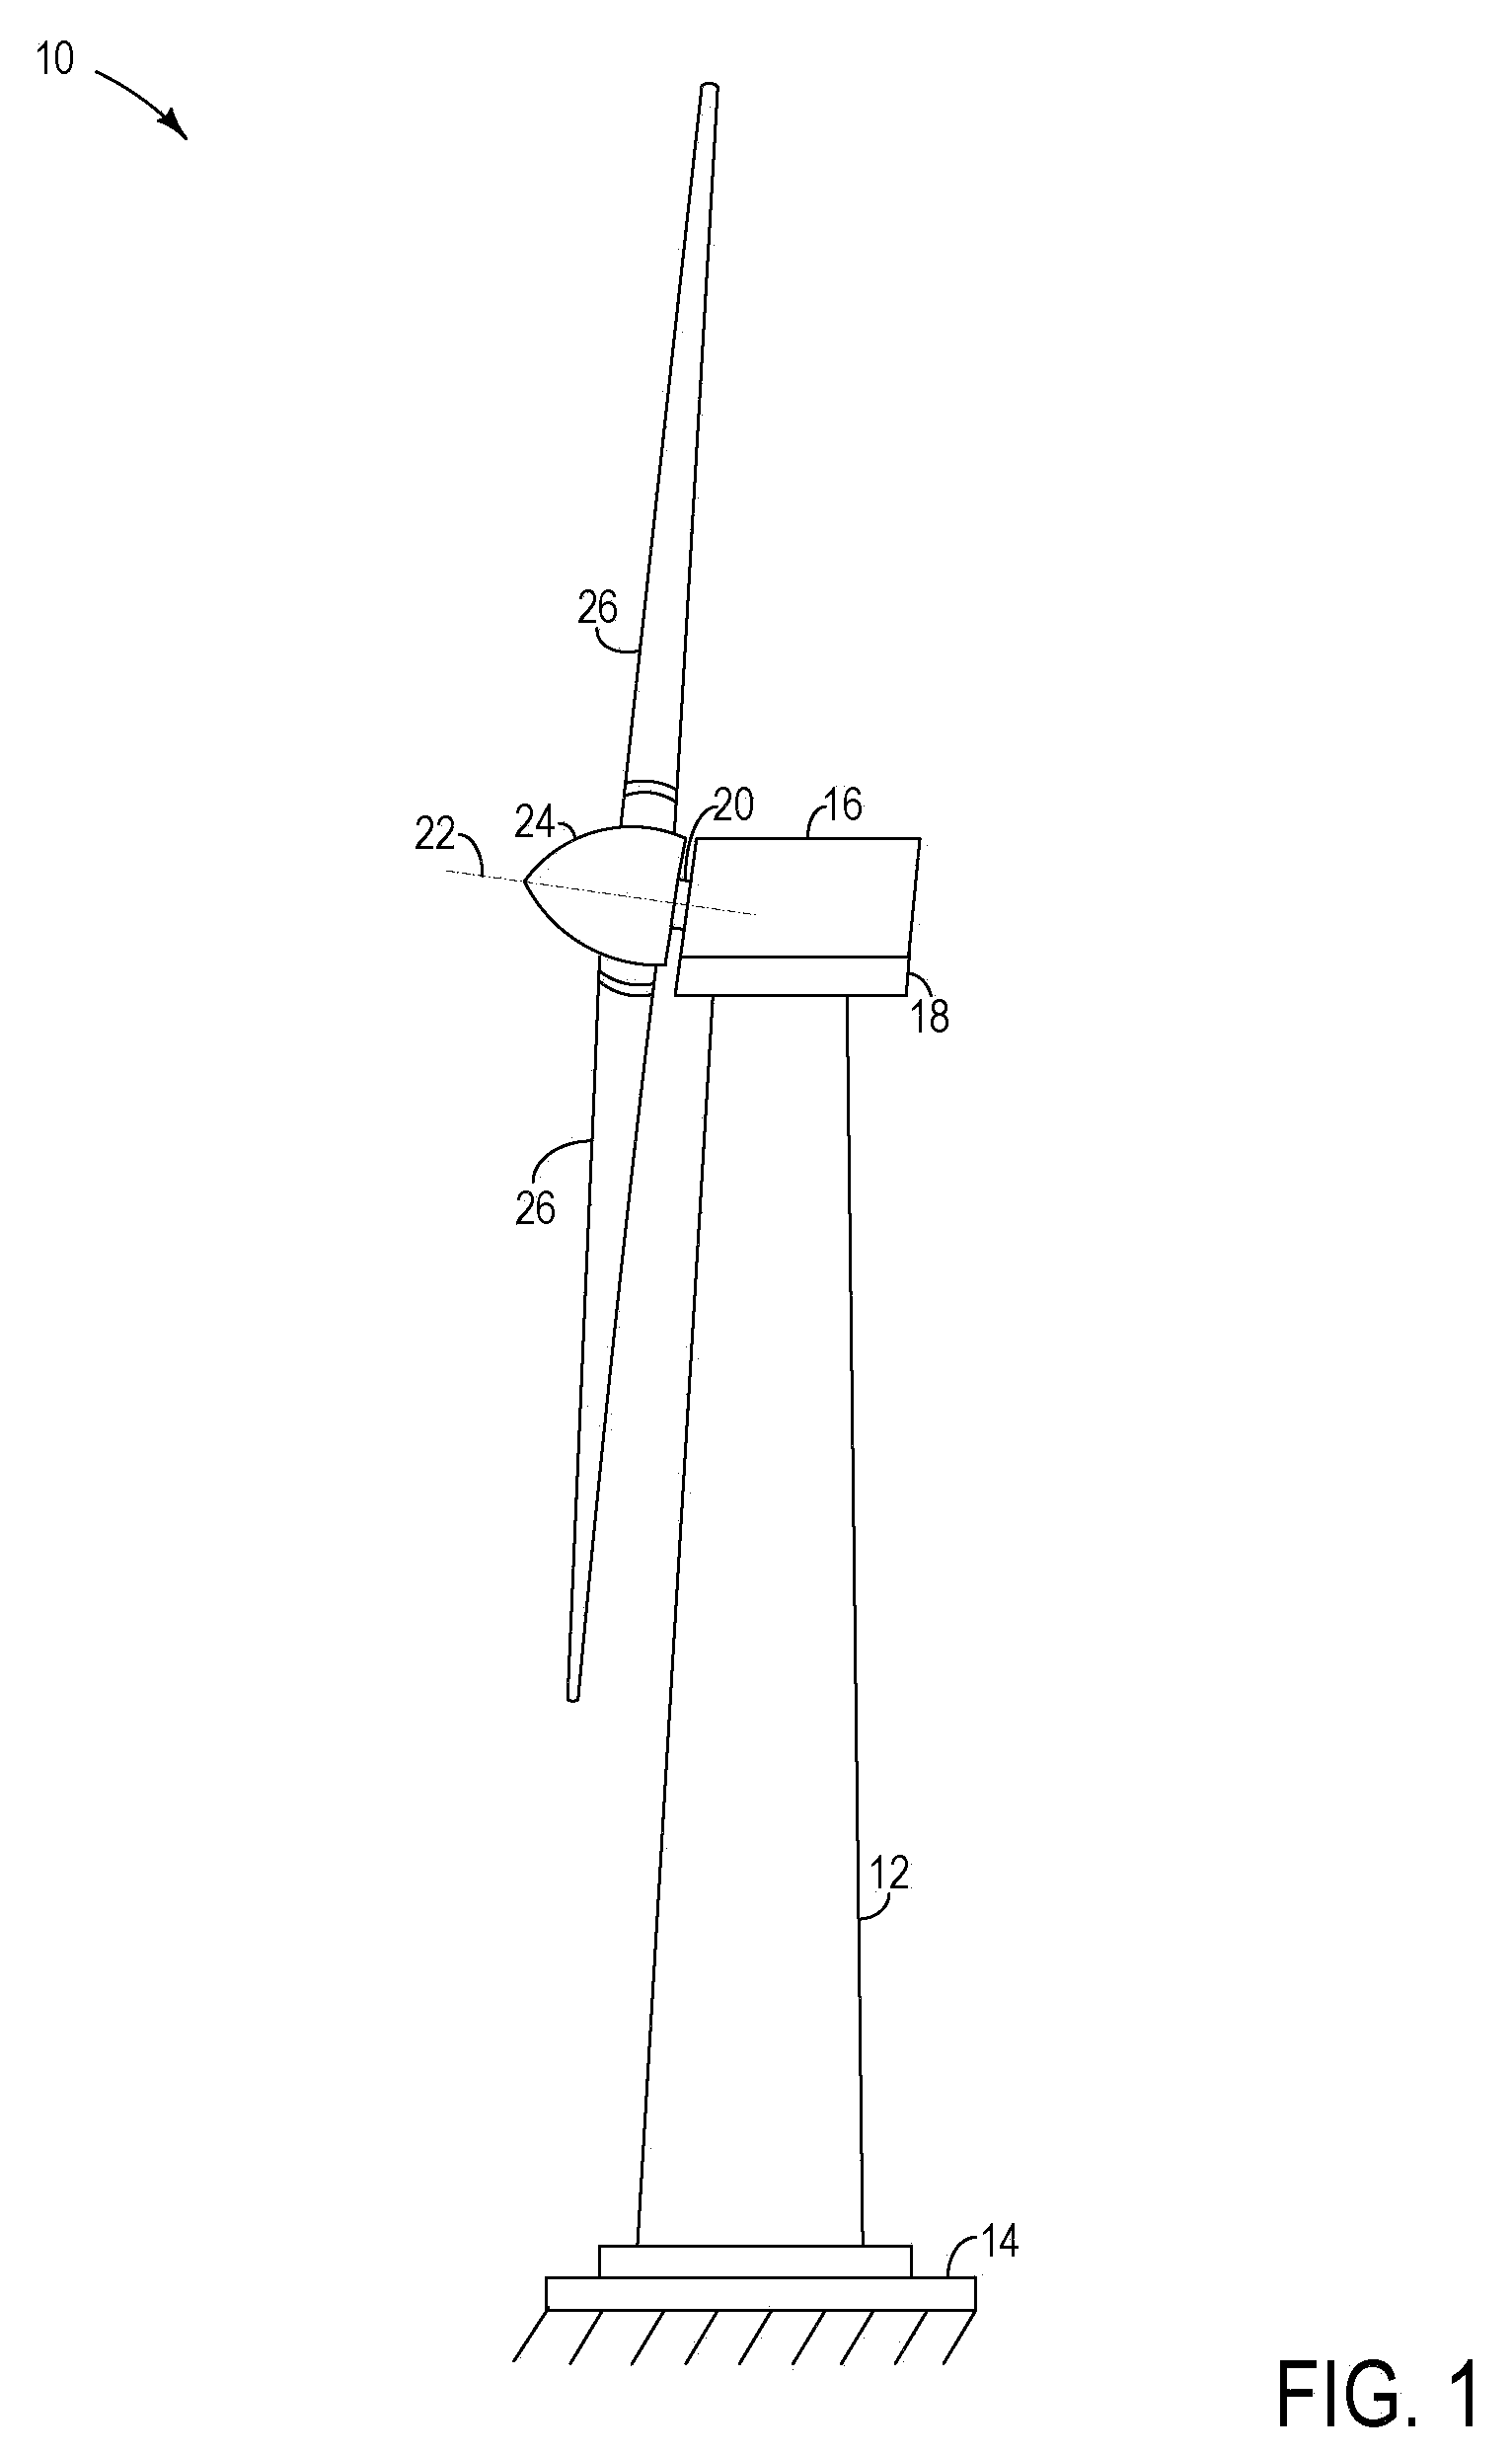 System and assembly for power transmission and generation in a wind turbine